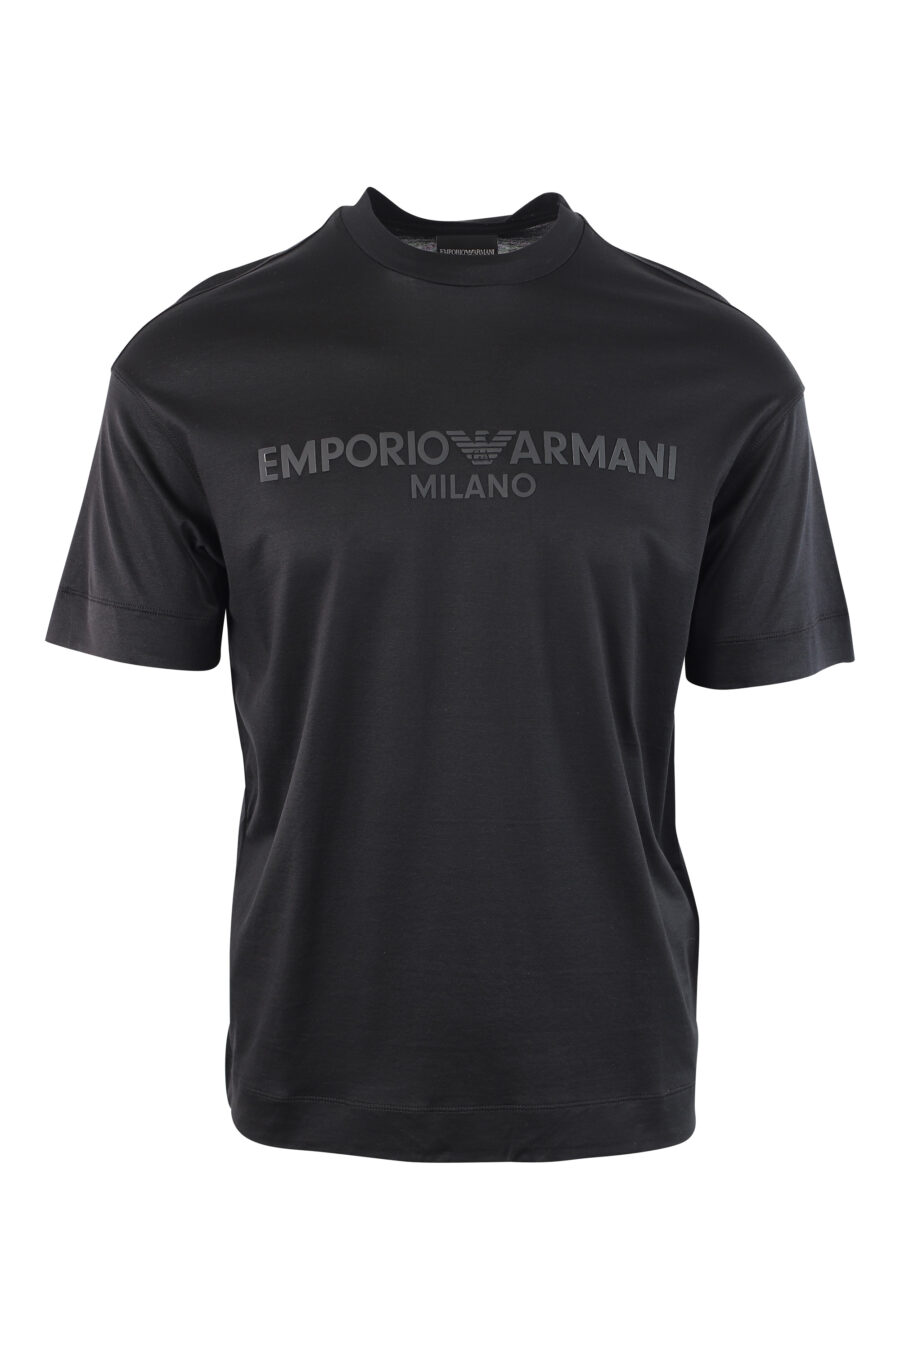 Black T-shirt with monochrome logo centred - IMG 3785